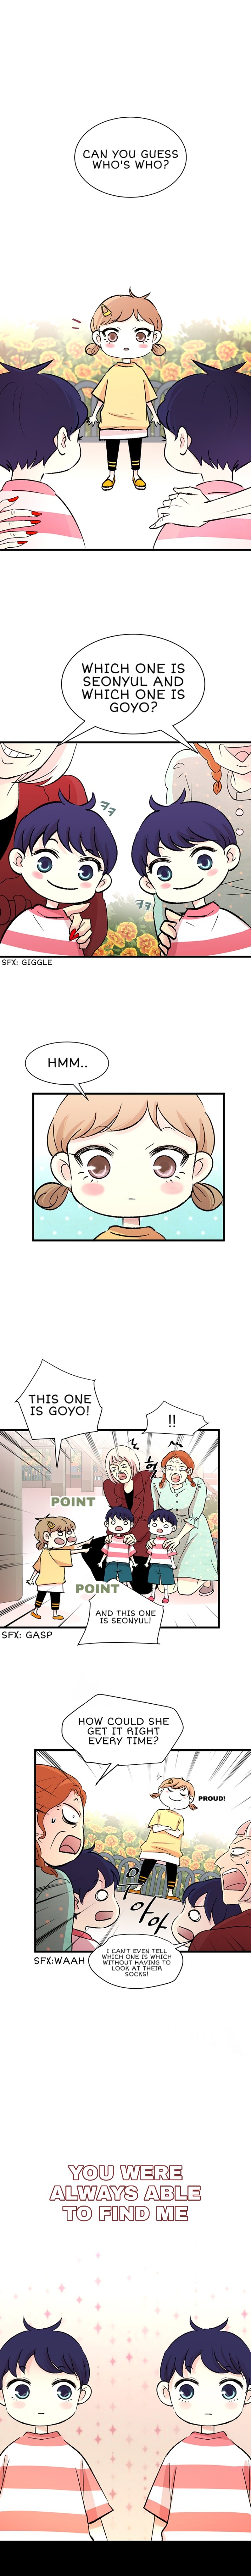 One By One Vol. 1 Ch. 0 Prologue